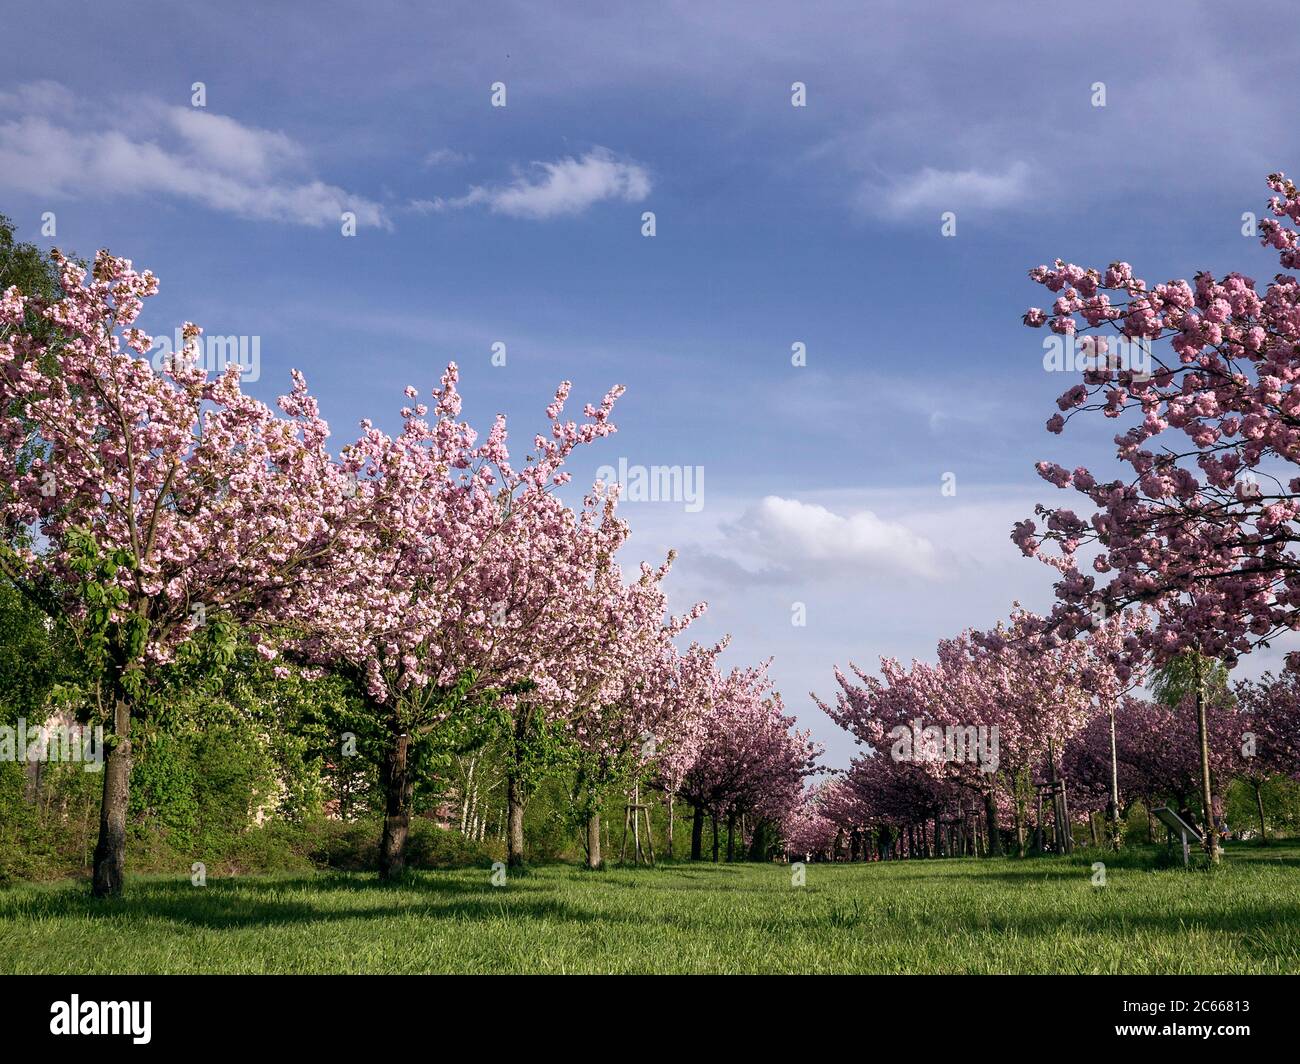 Blossoming almond trees in a green area Stock Photo